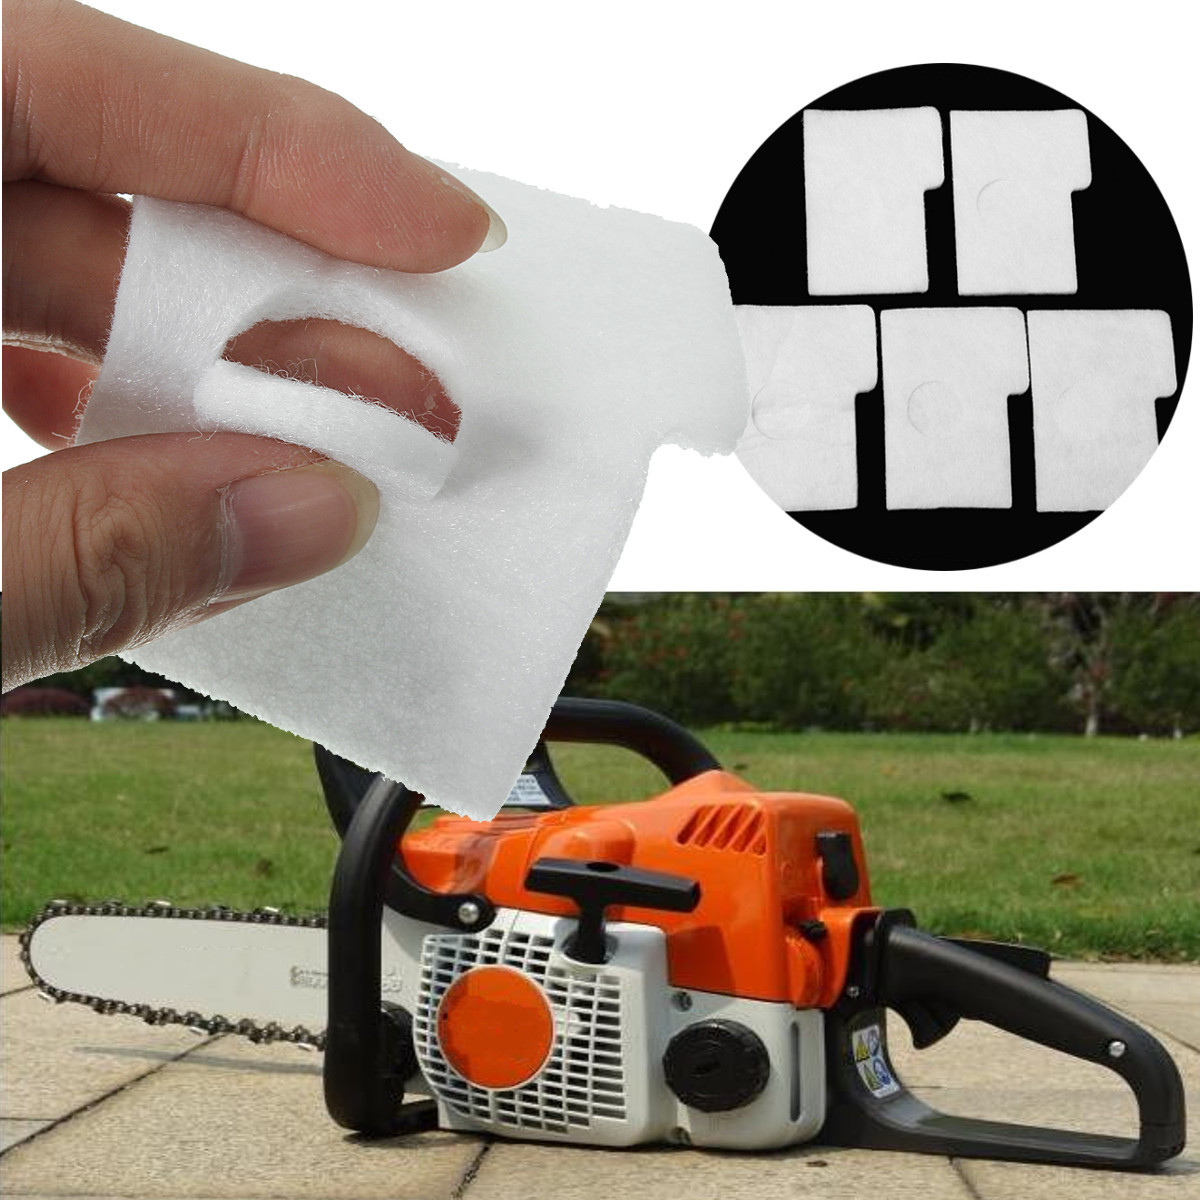 

5pcs Replace Air Filter For Stihl MS170 MS180 017 018 Chainsaw 1130 124 08